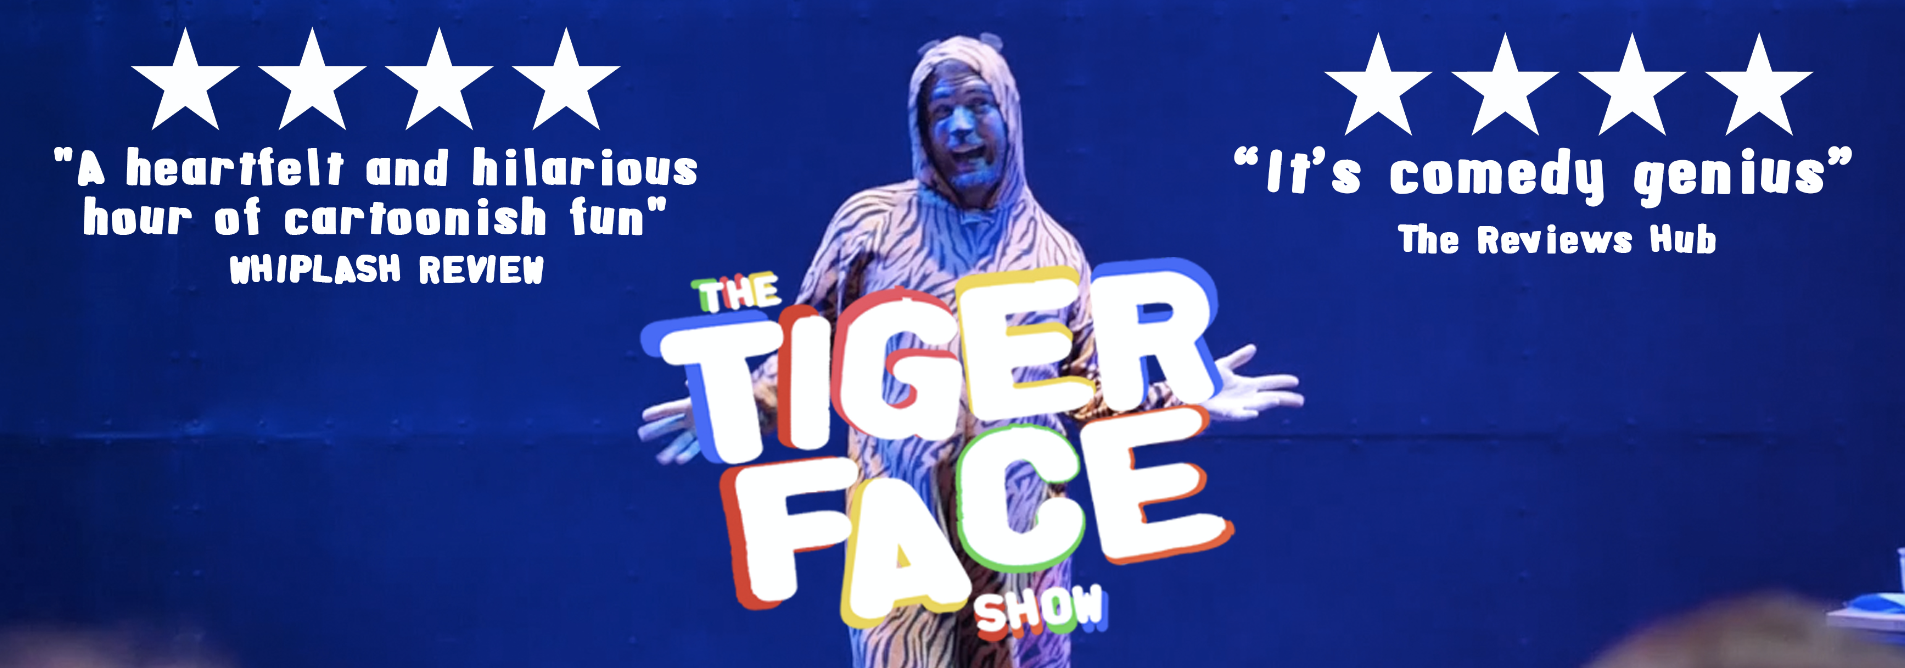 The wording TigerFace on a blue banner with quotes on the show